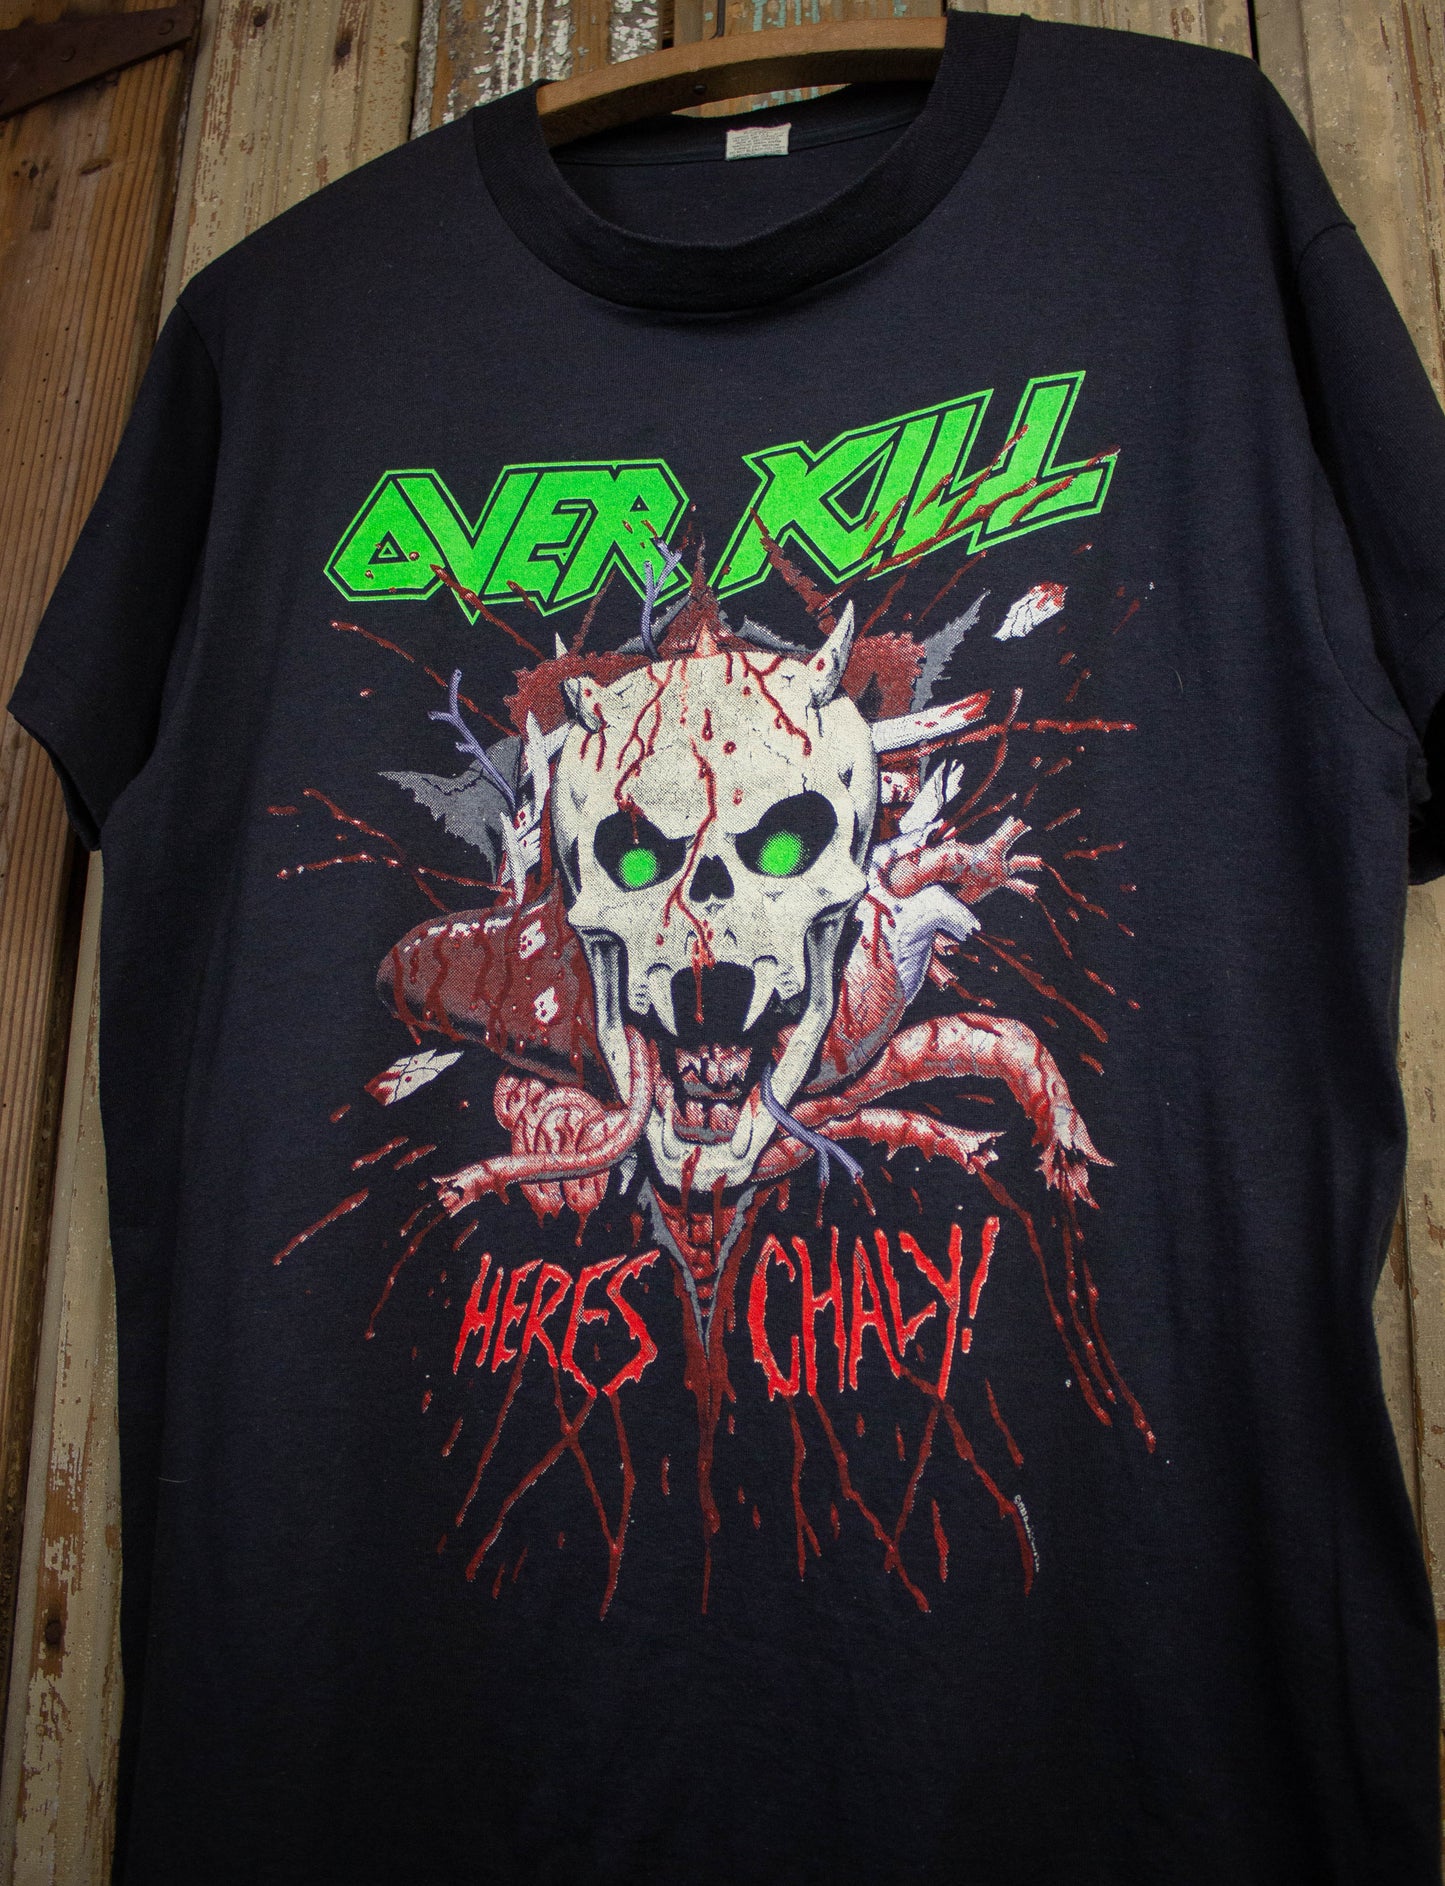 Vintage Over Kill Here's Chaly Concert T Shirt 1988 Black Large